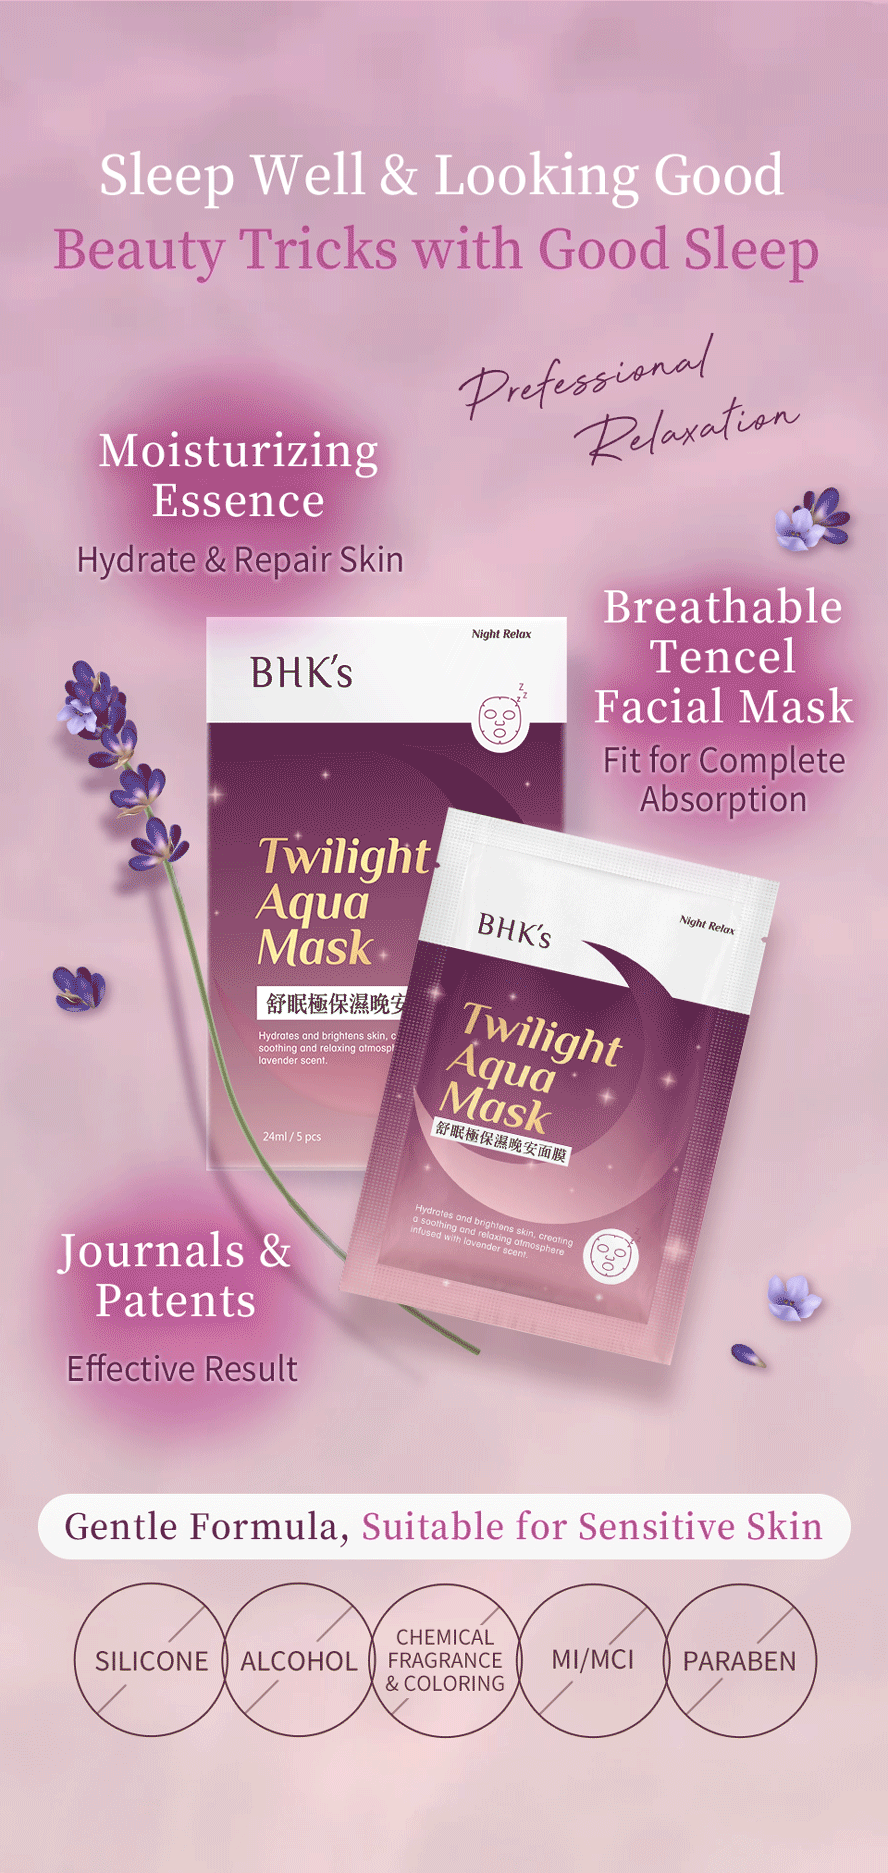 BHK's Twilight Aqua Mask has proven hydrates skin effectively and promote good sleep quality with gentle formula for sensitive skin people.